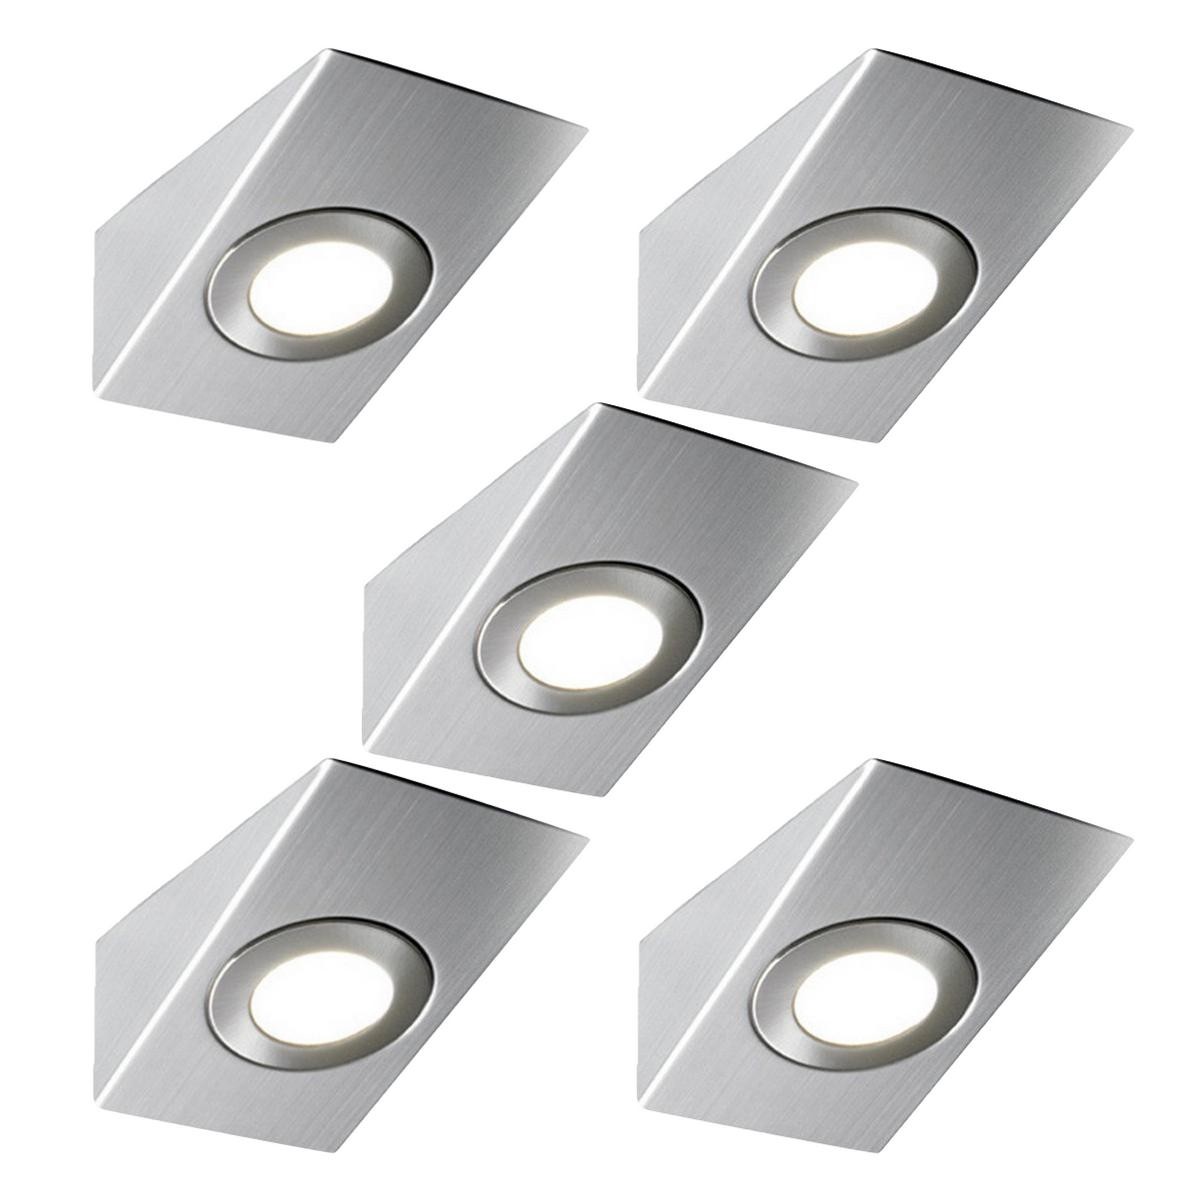 View 5 Pack Of Wedge Shaped LED Under Cabinet Lights With 15w Driver information